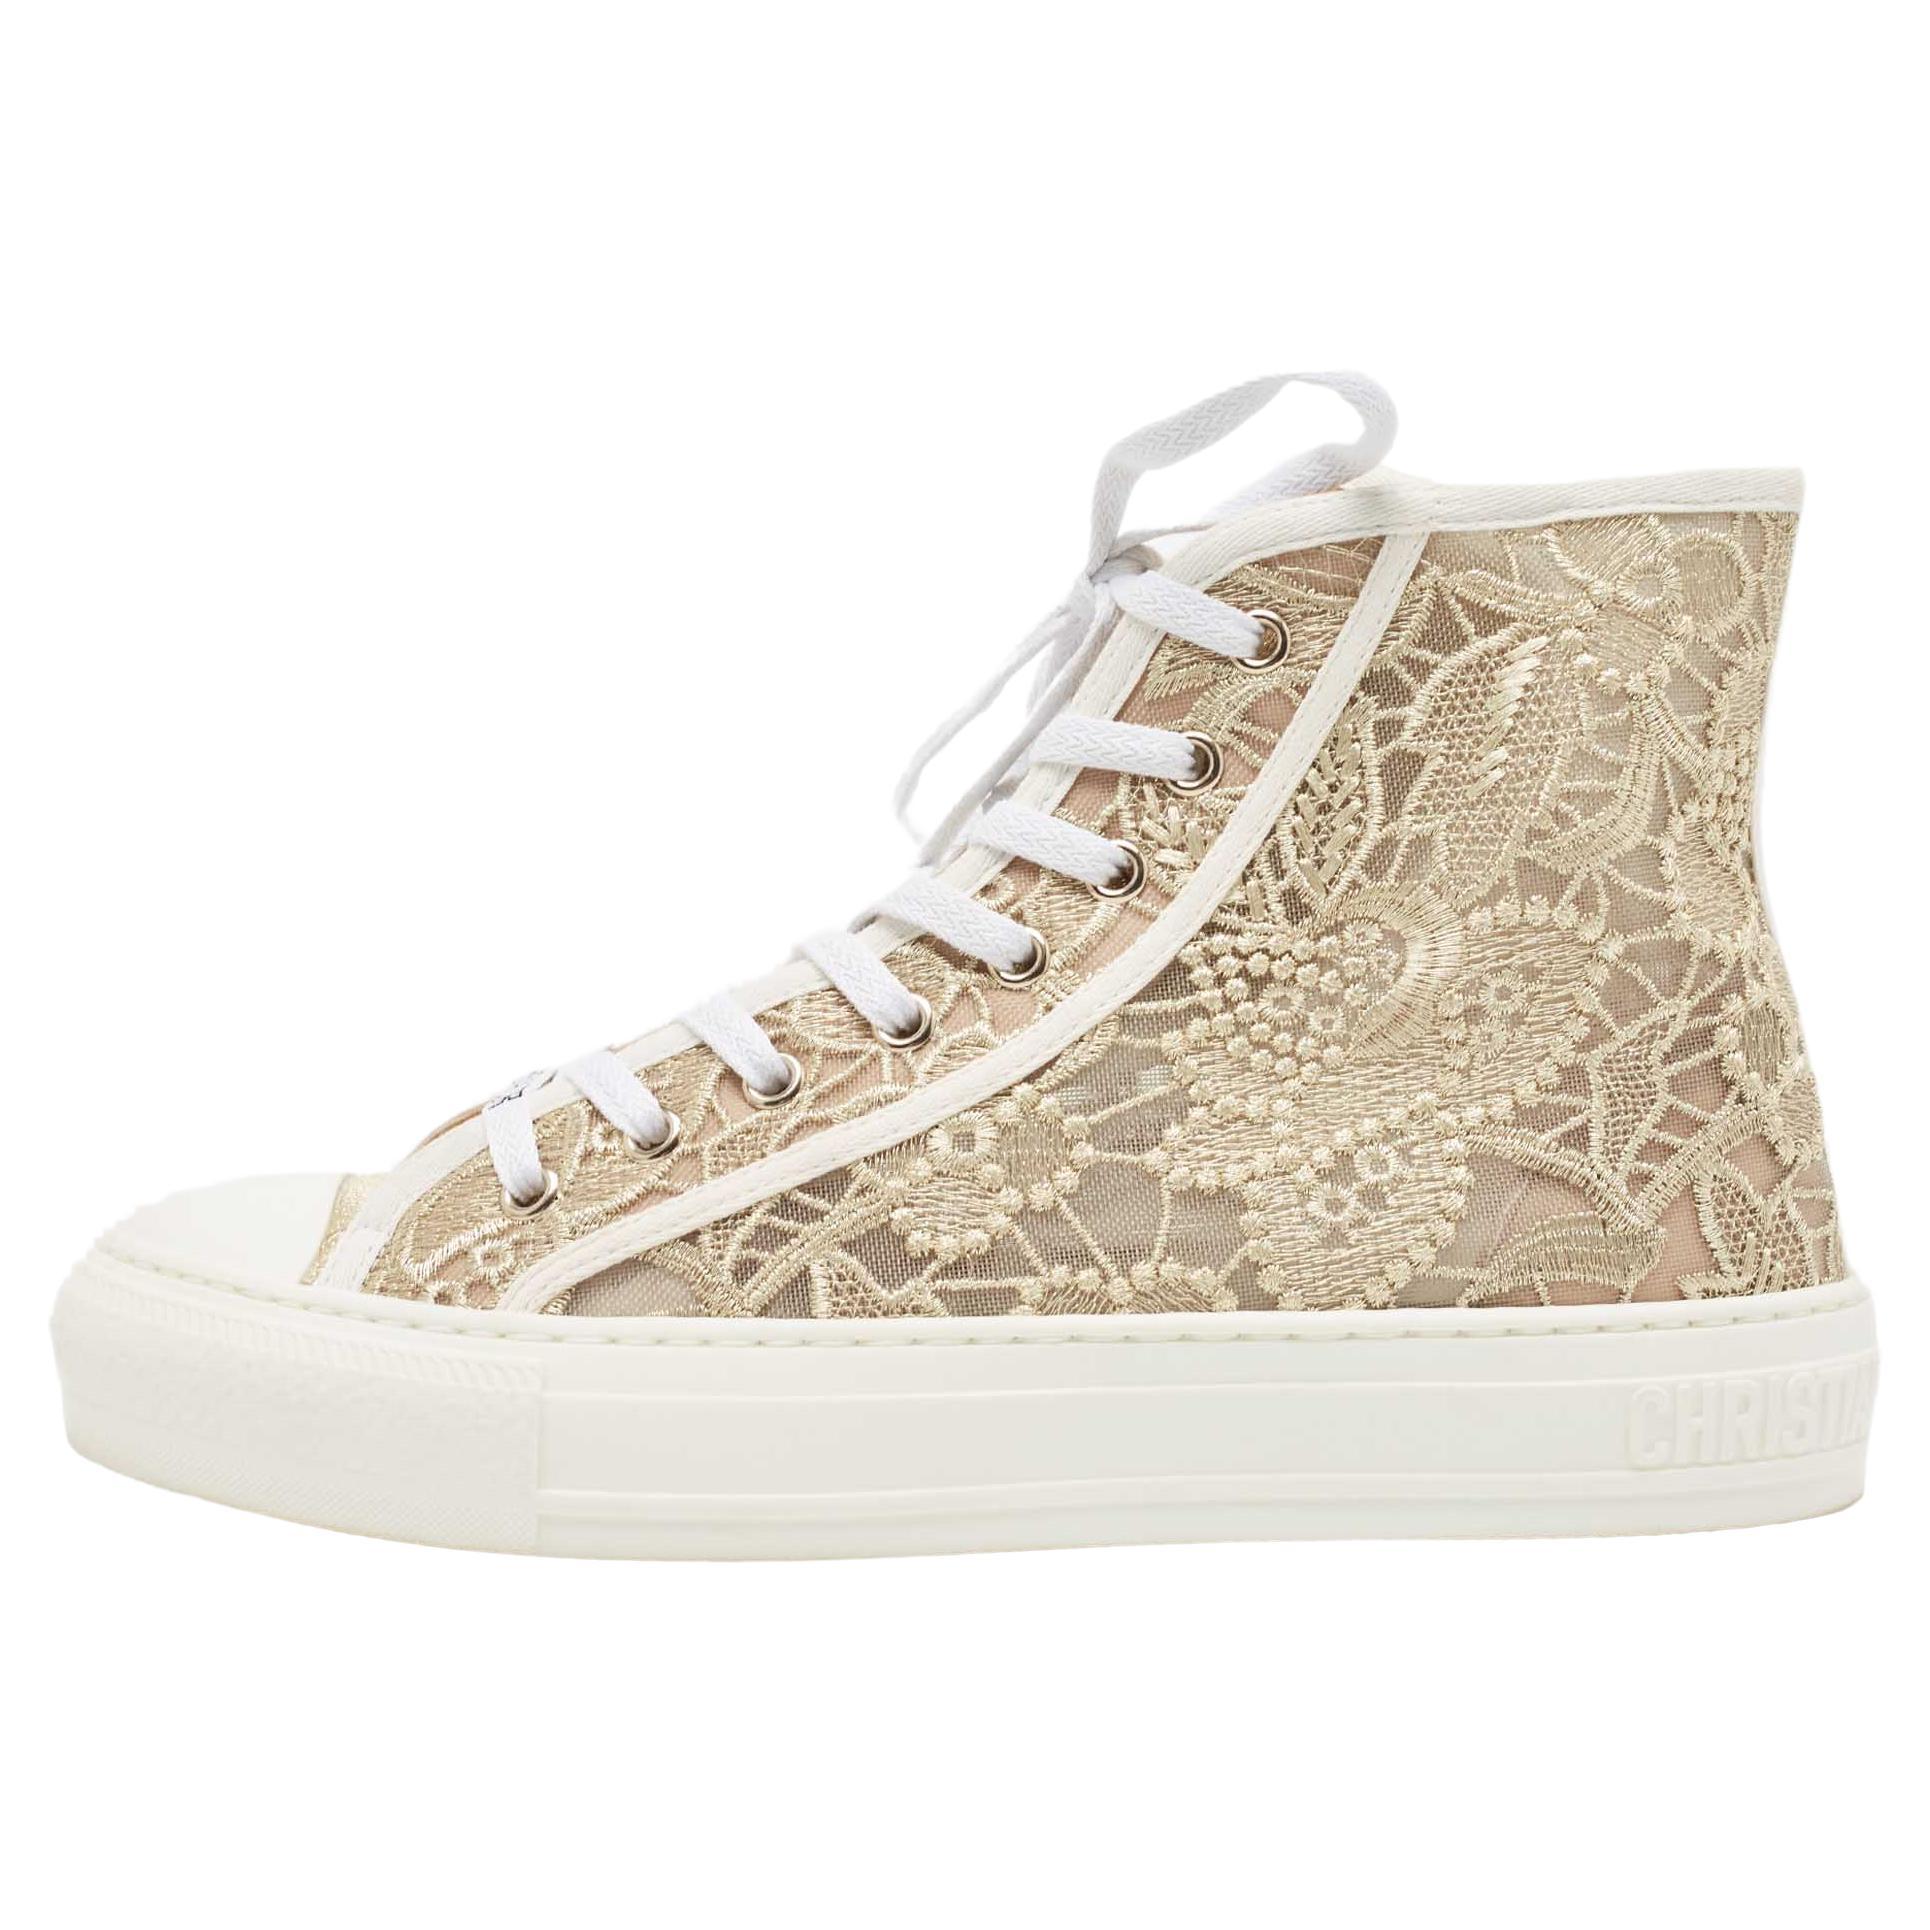 Dior Gold/White Lace and Rubber Walk'n'Dior Sneakers Size 38.5